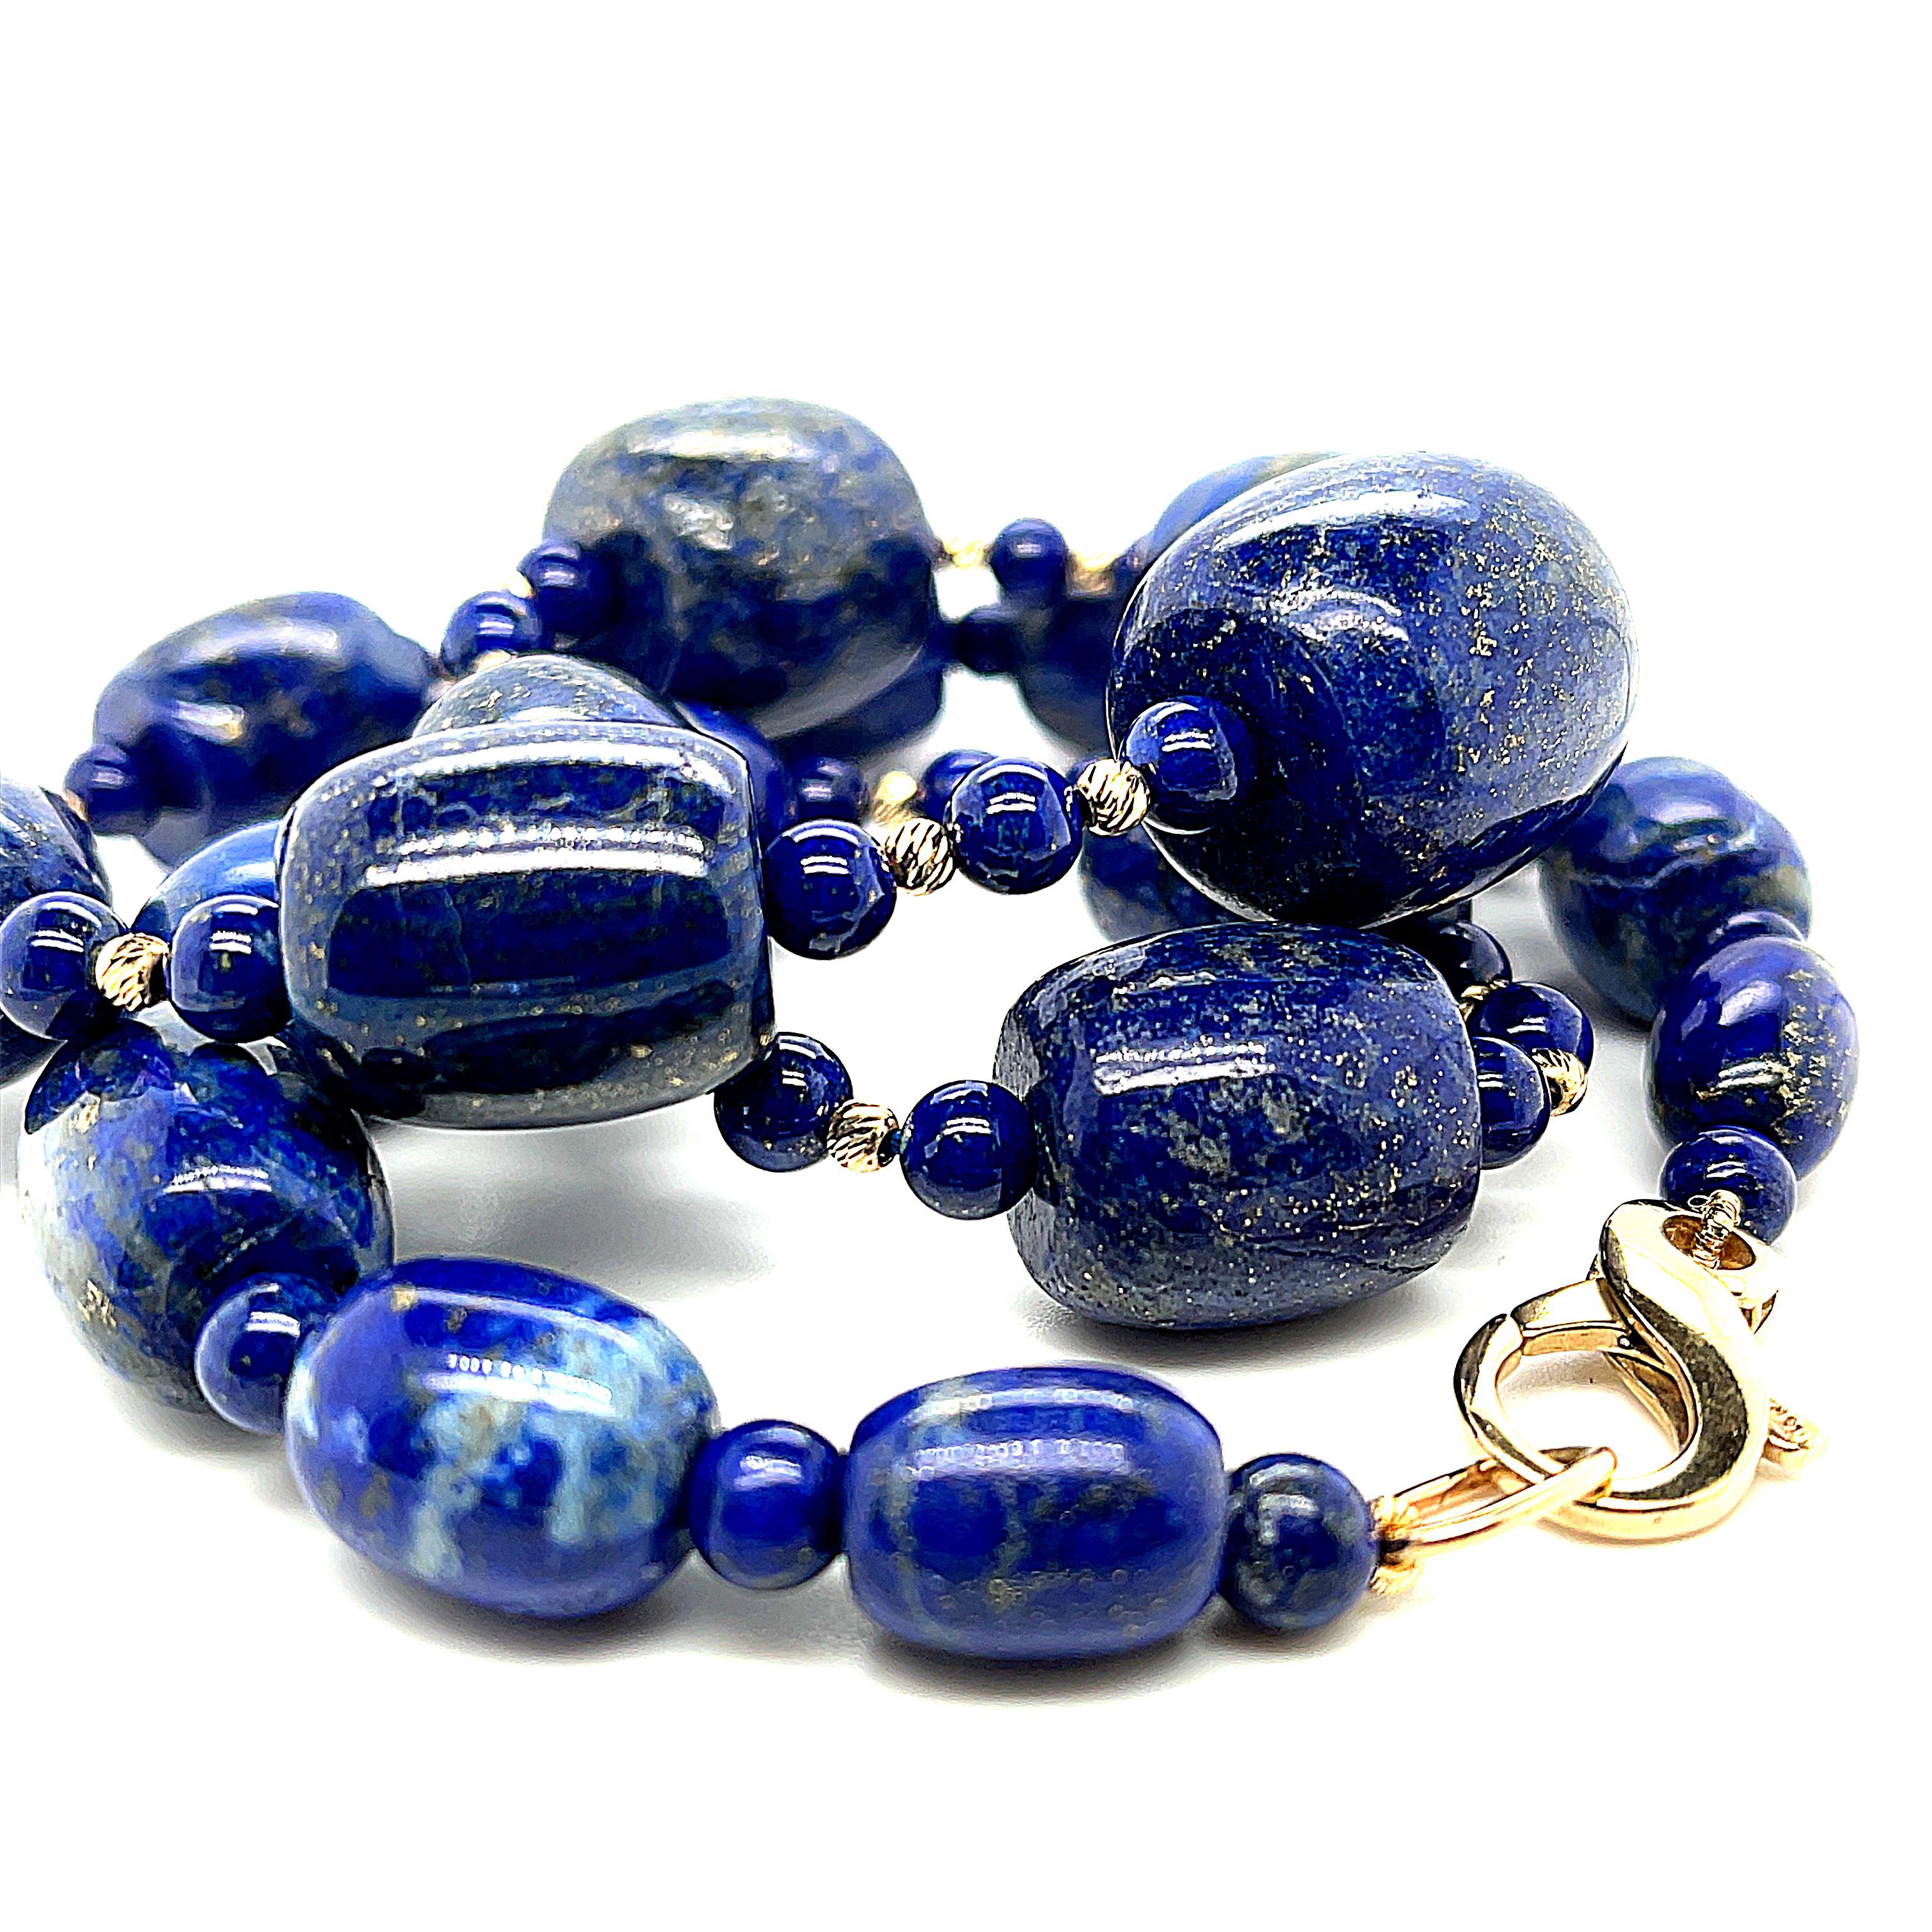 This impressive beaded necklace features rich, violetish blue lapis lazuli beads in large, graduating barrel shapes! The barrel shapes have been arranged and strung on silk thread, accented with perfectly uniform lapis round beads and bright, 14k